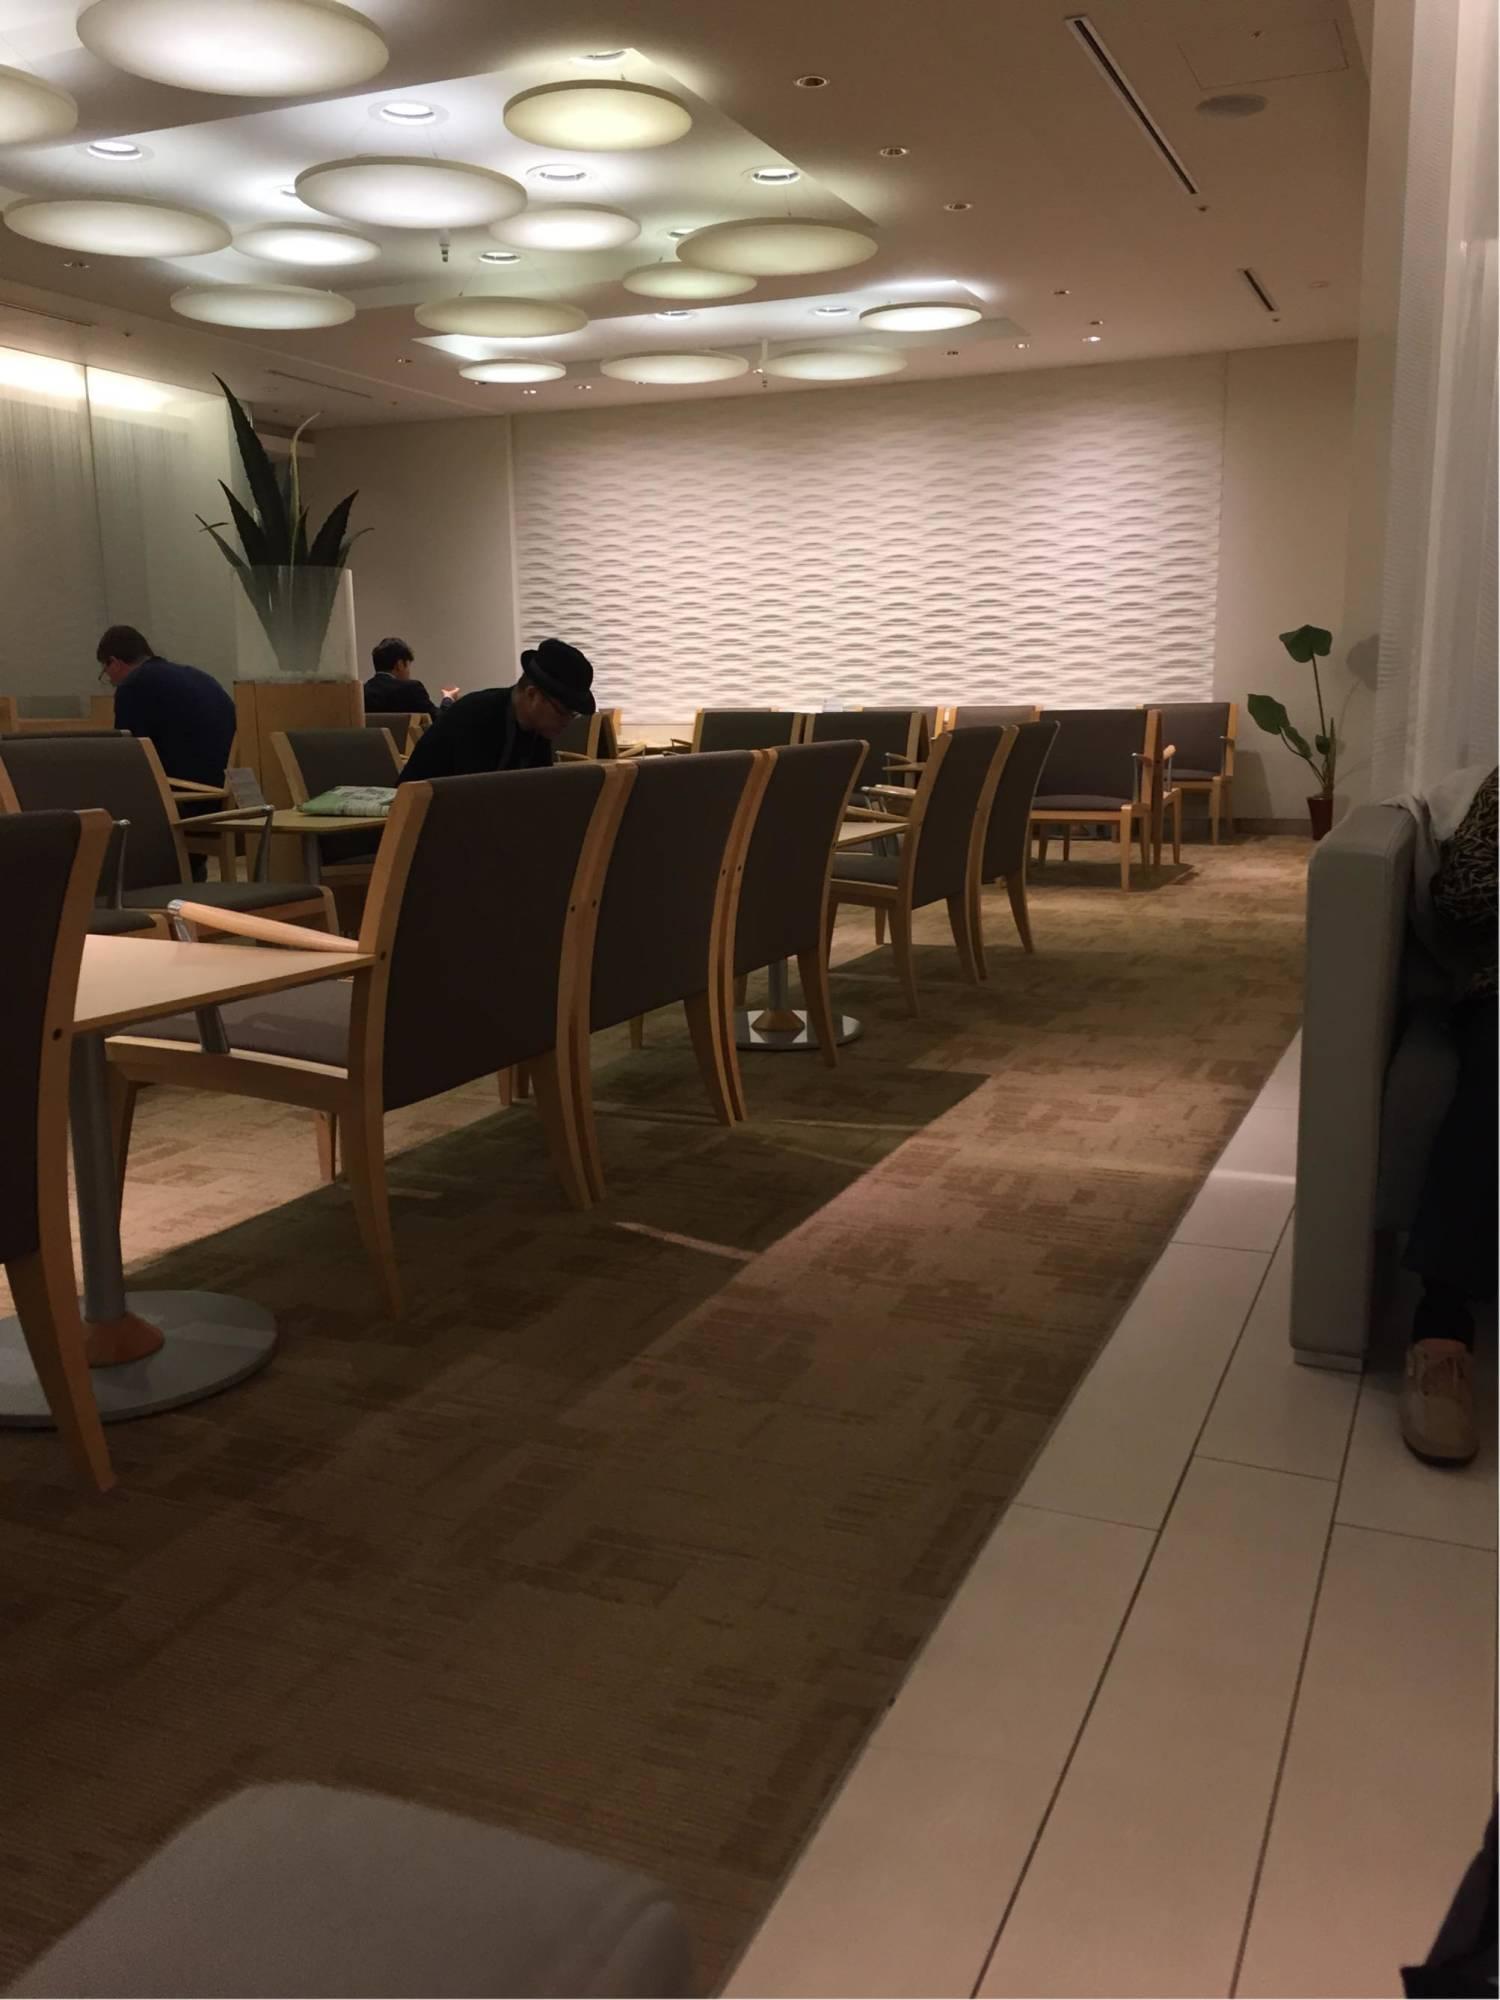 All Nippon Airways ANA Arrival Lounge image 2 of 11